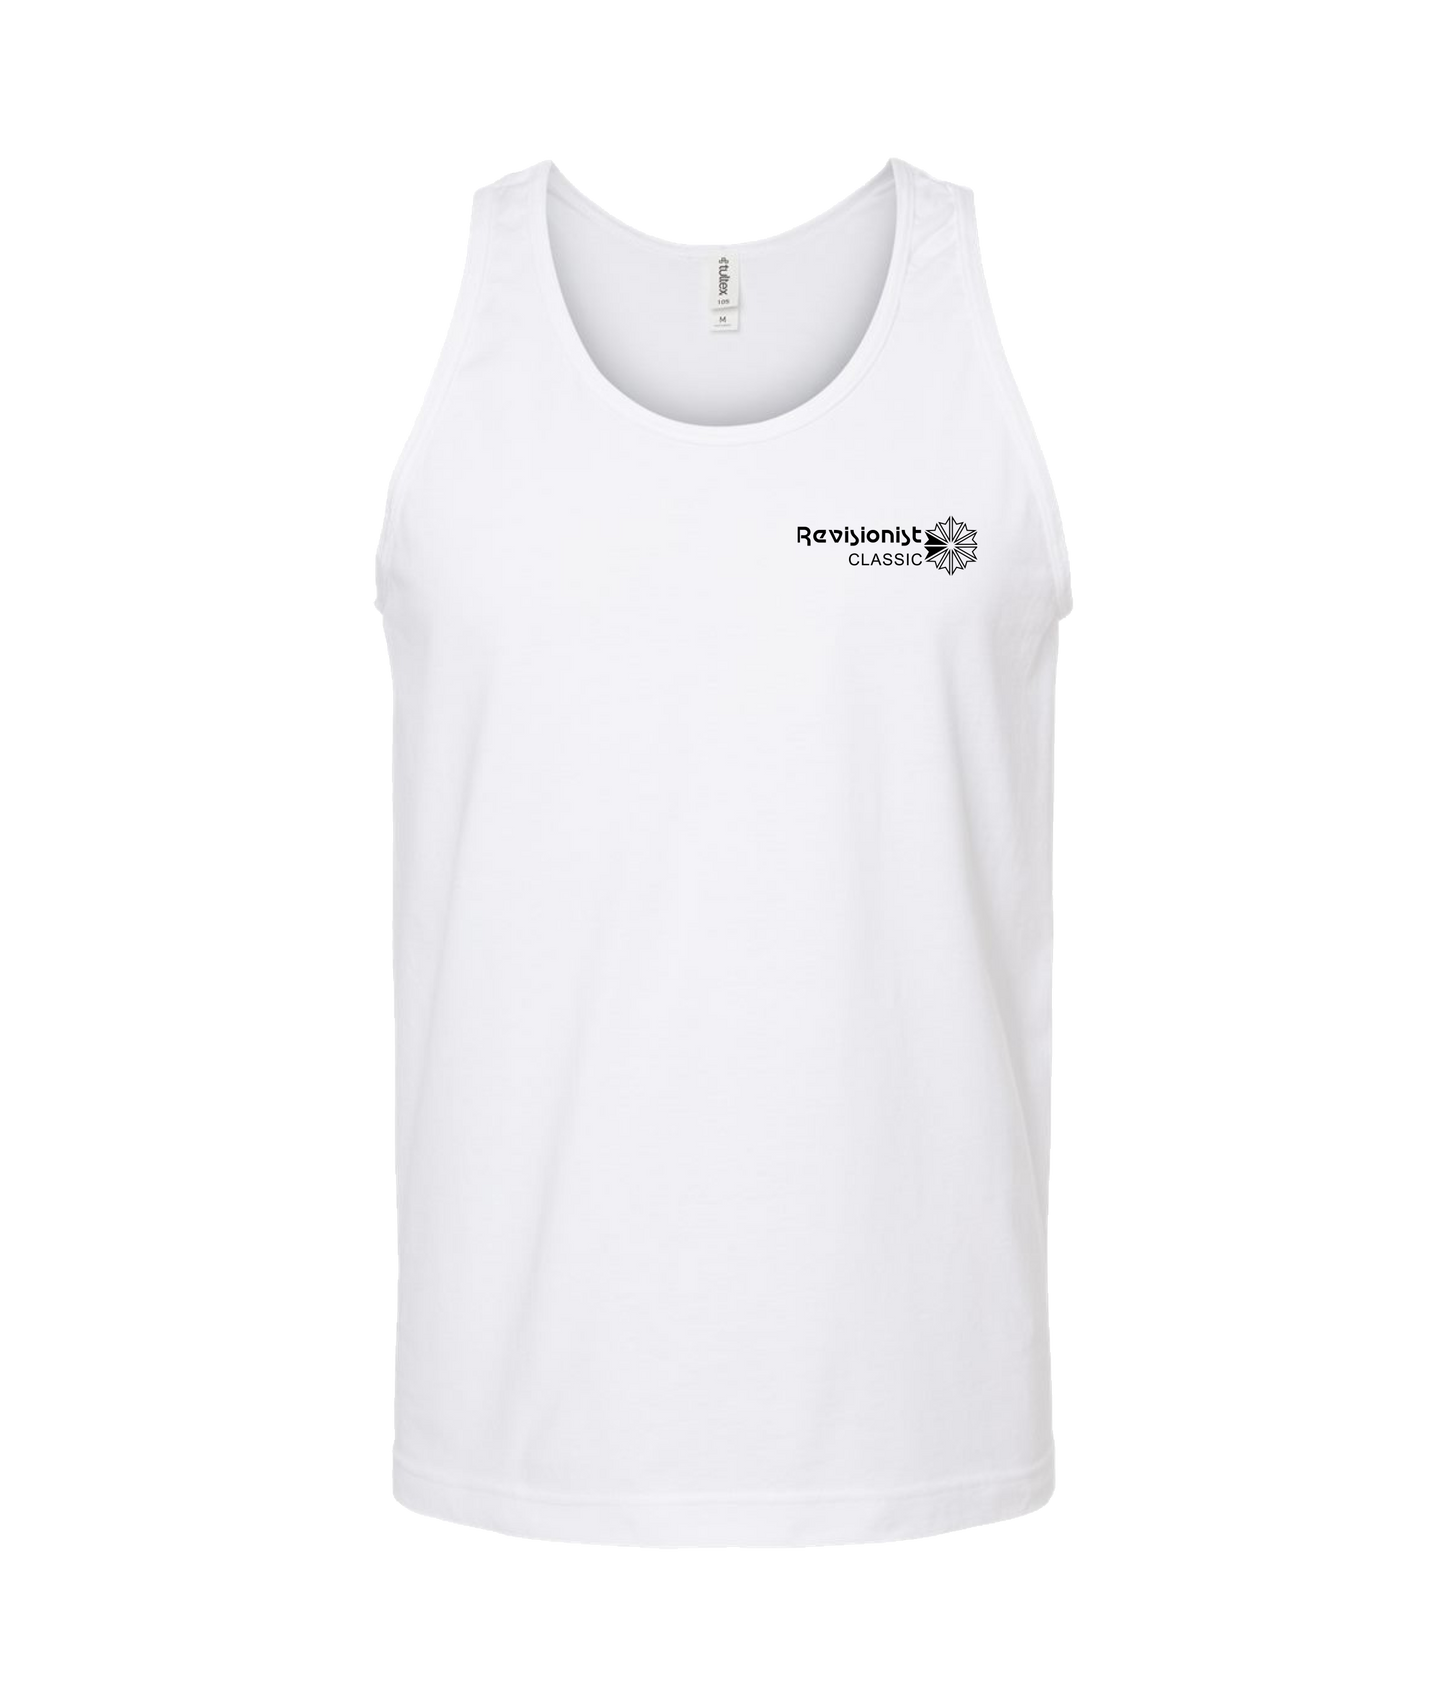 Revisionist - Logo - White Tank Top